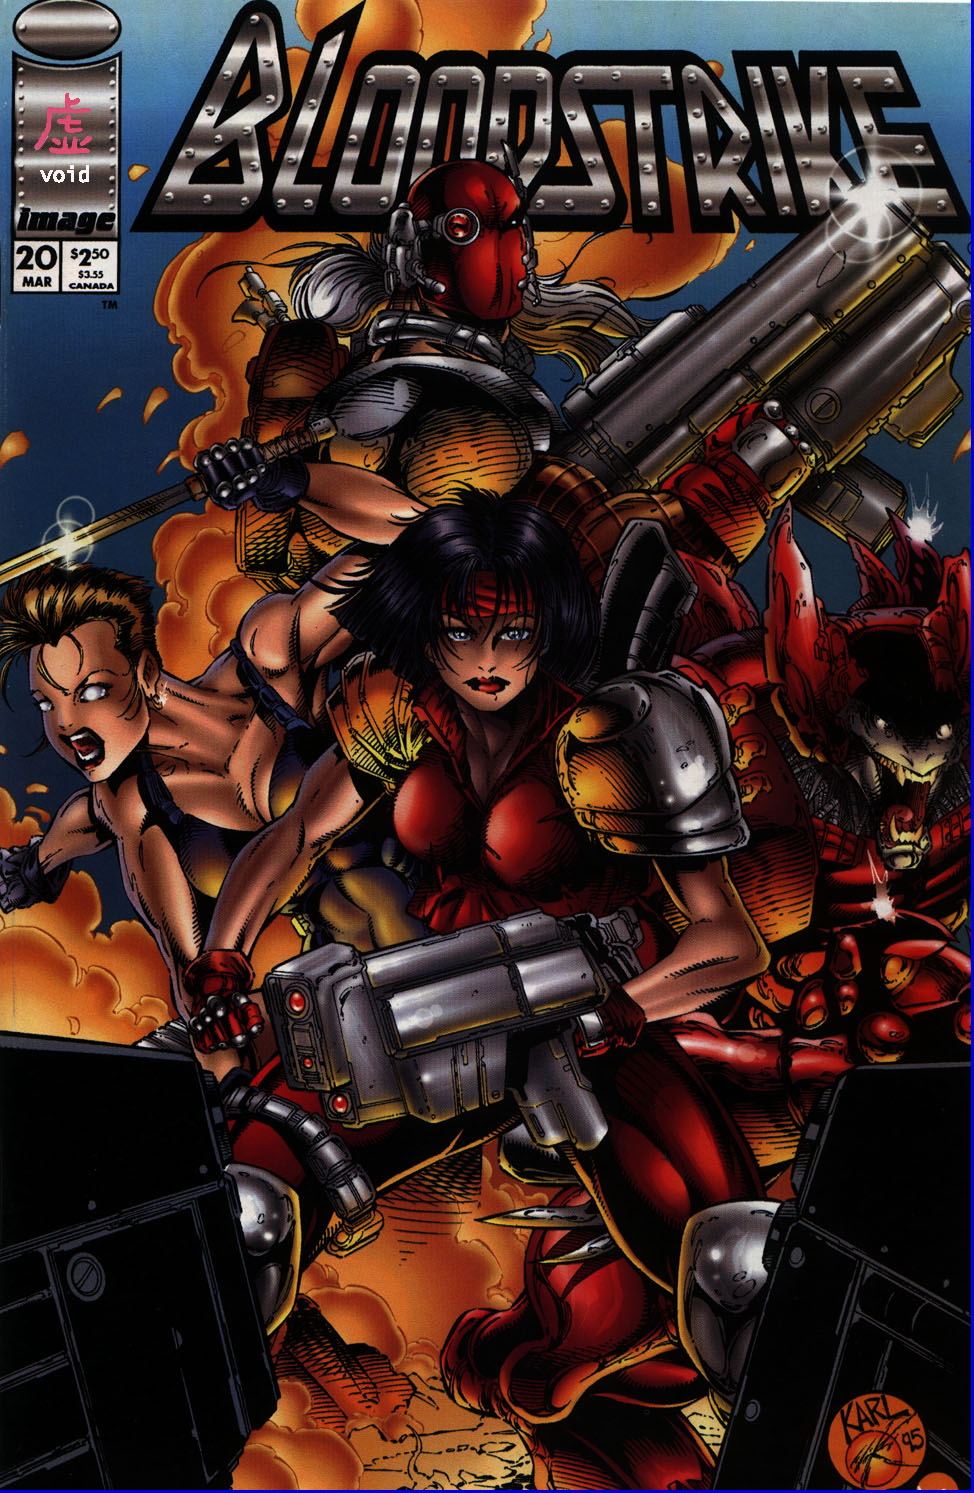 Bloodstrike (1993) issue 20 - Page 1